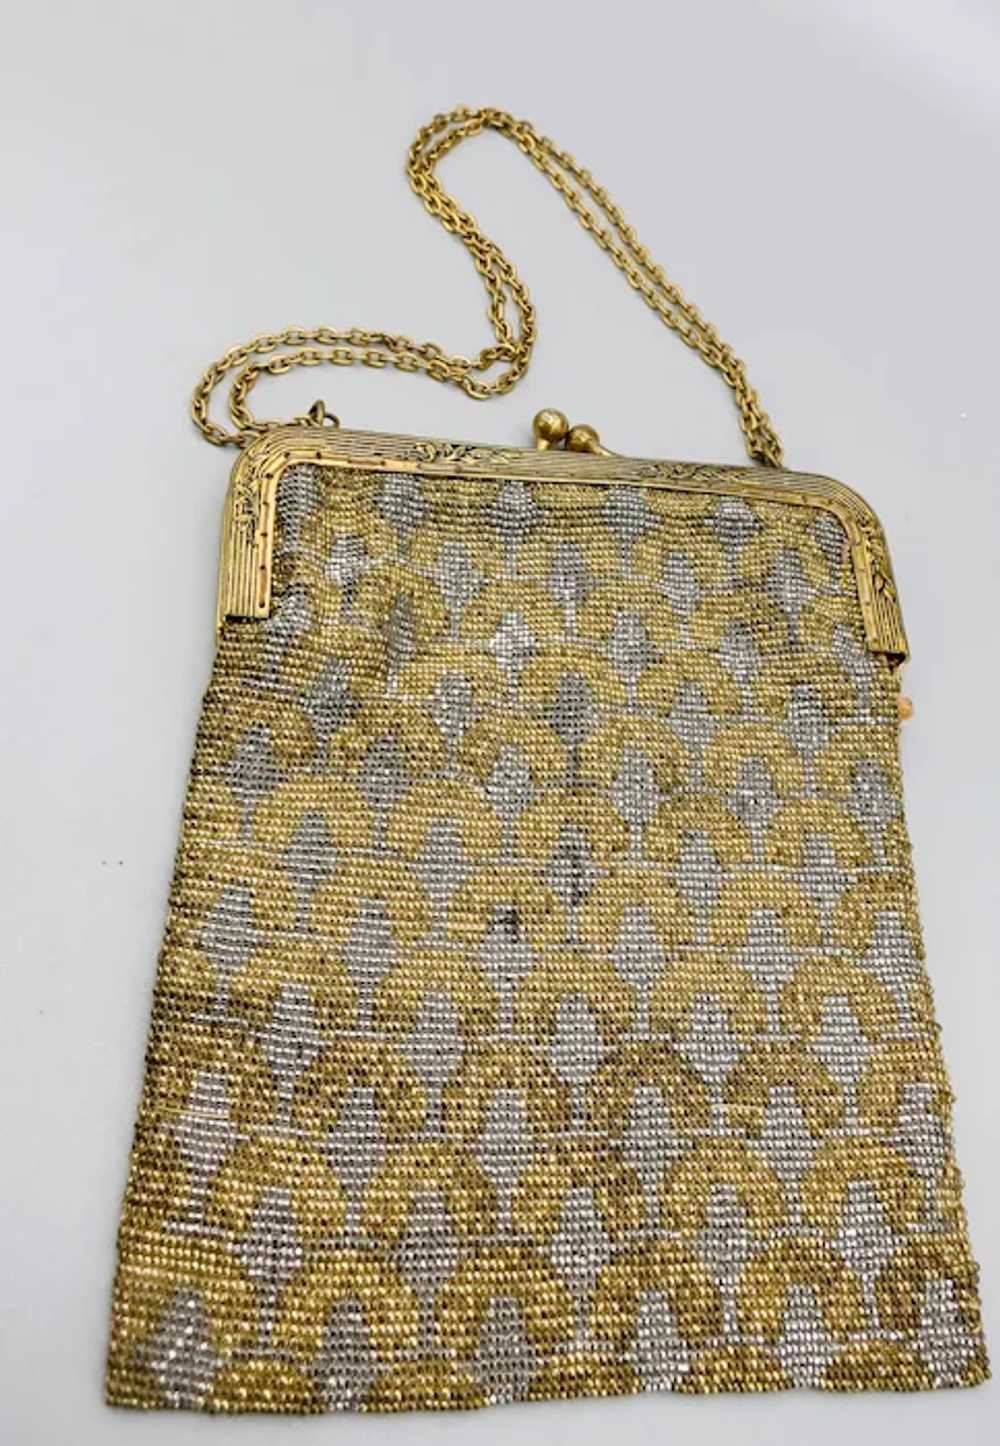 ANTIQUE French Micro Steel Bead Purse - image 2